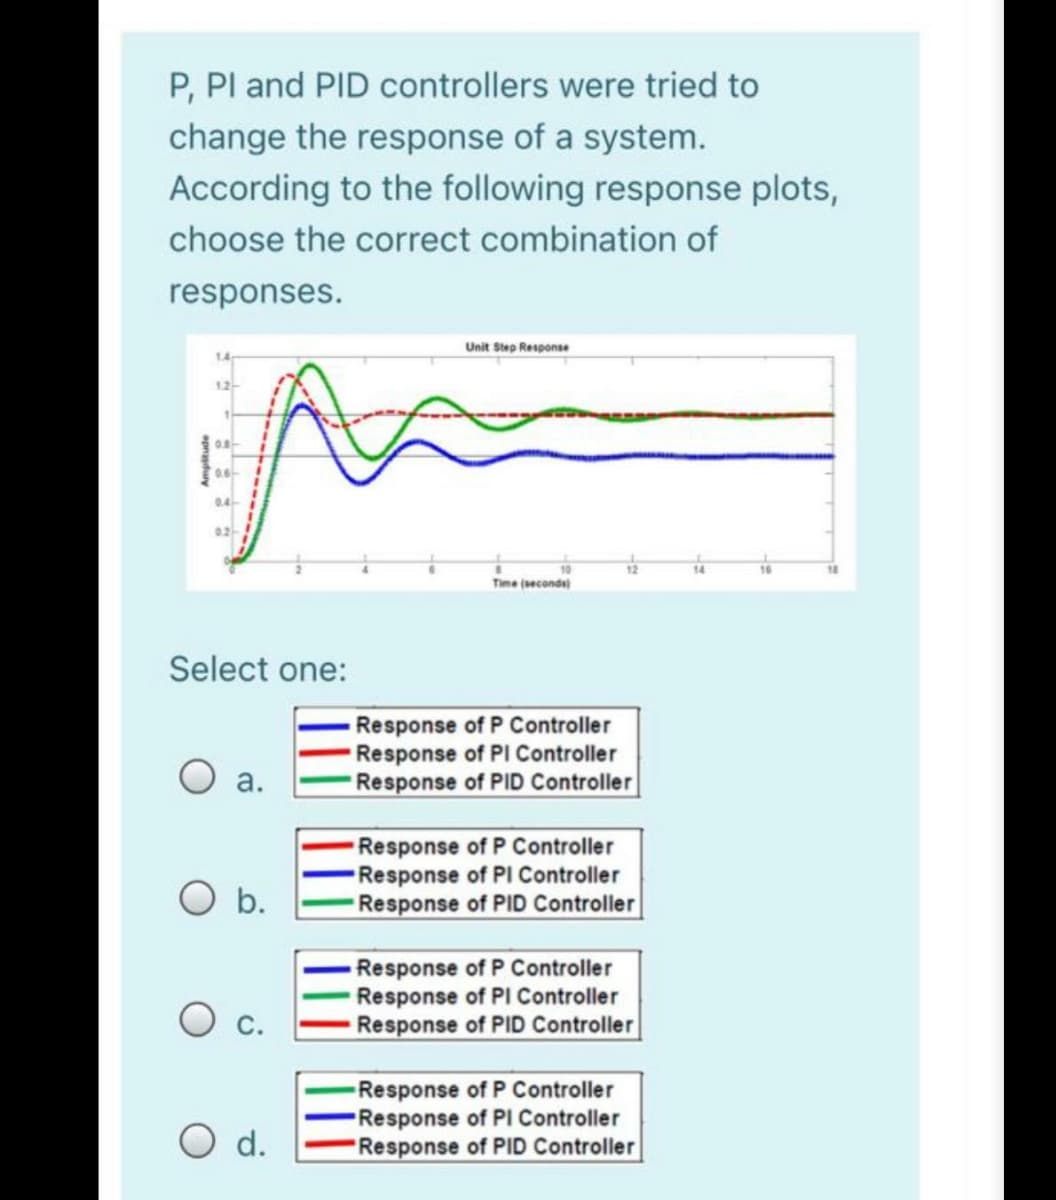 P, Pl and PID controllers were tried to
change the response of a system.
According to the following response plots,
choose the correct combination of
responses.
Unit Step Response
12
Time (seconda
Select one:
Response of P Controller
Response of PI Controller
Response of PID Controller
a.
Response of P Controller
Response of PI Controller
Response of PID Controller
Response of P Controller
Response of PI Controller
Response of PID Controller
Response of P Controller
Response of PI Controller
Response of PID Controller
O d.
